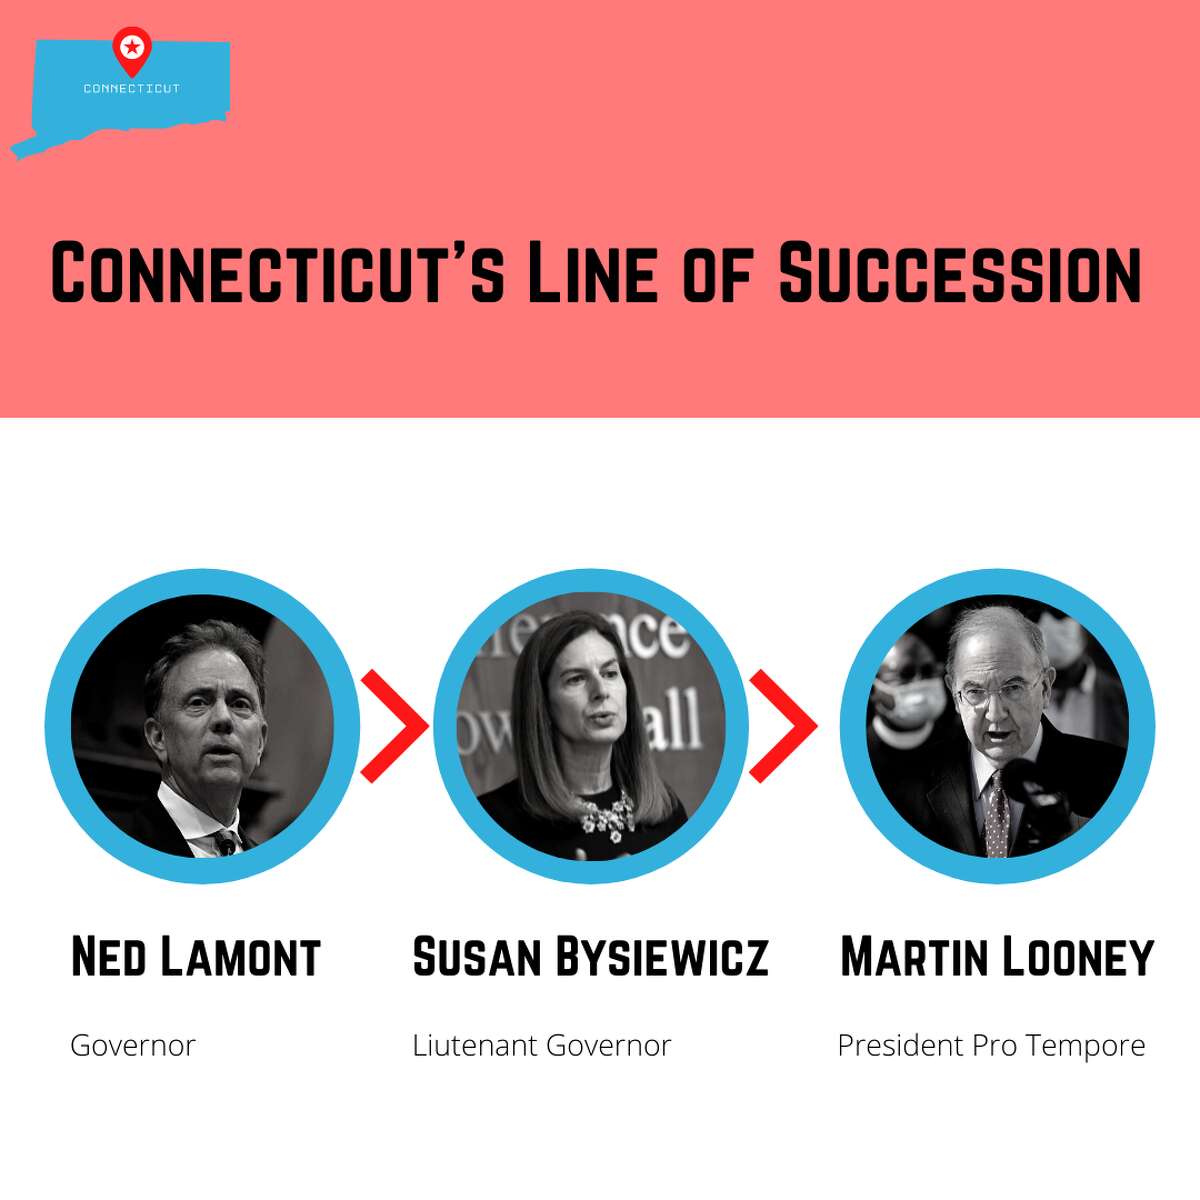 Connecticut's Line of Succession for the Governor's position. 